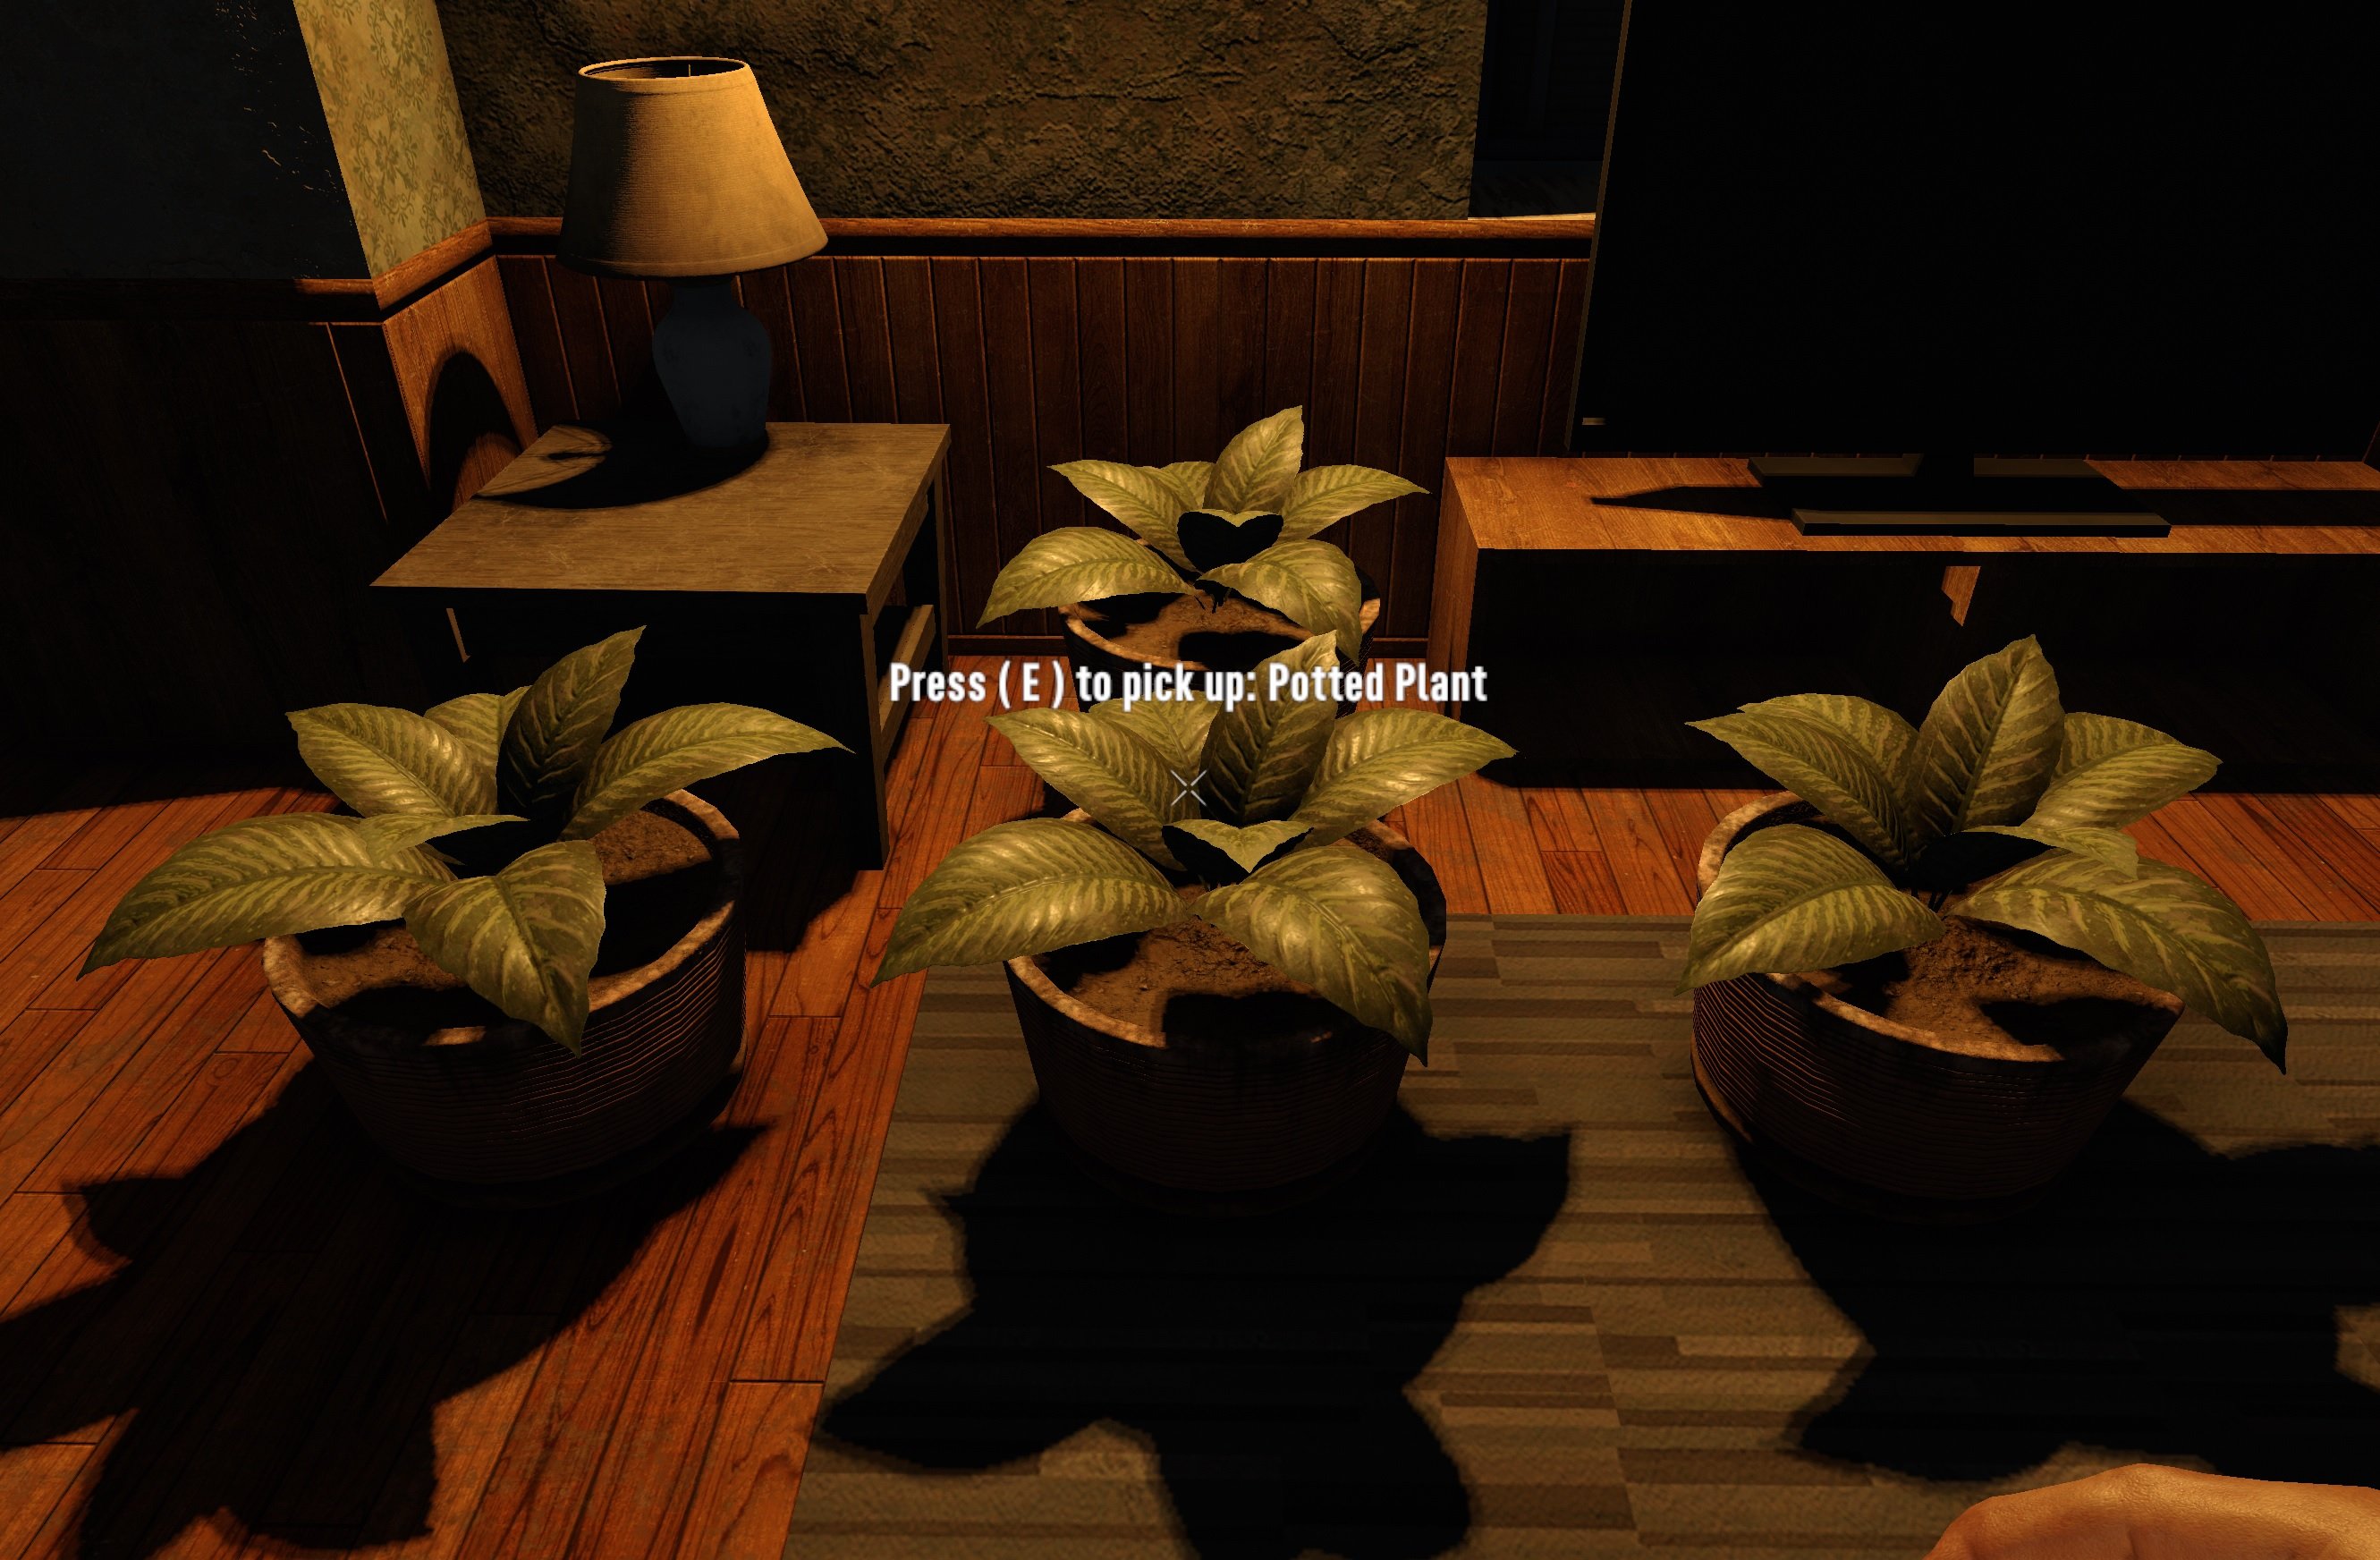 More information about "Potted Plants"